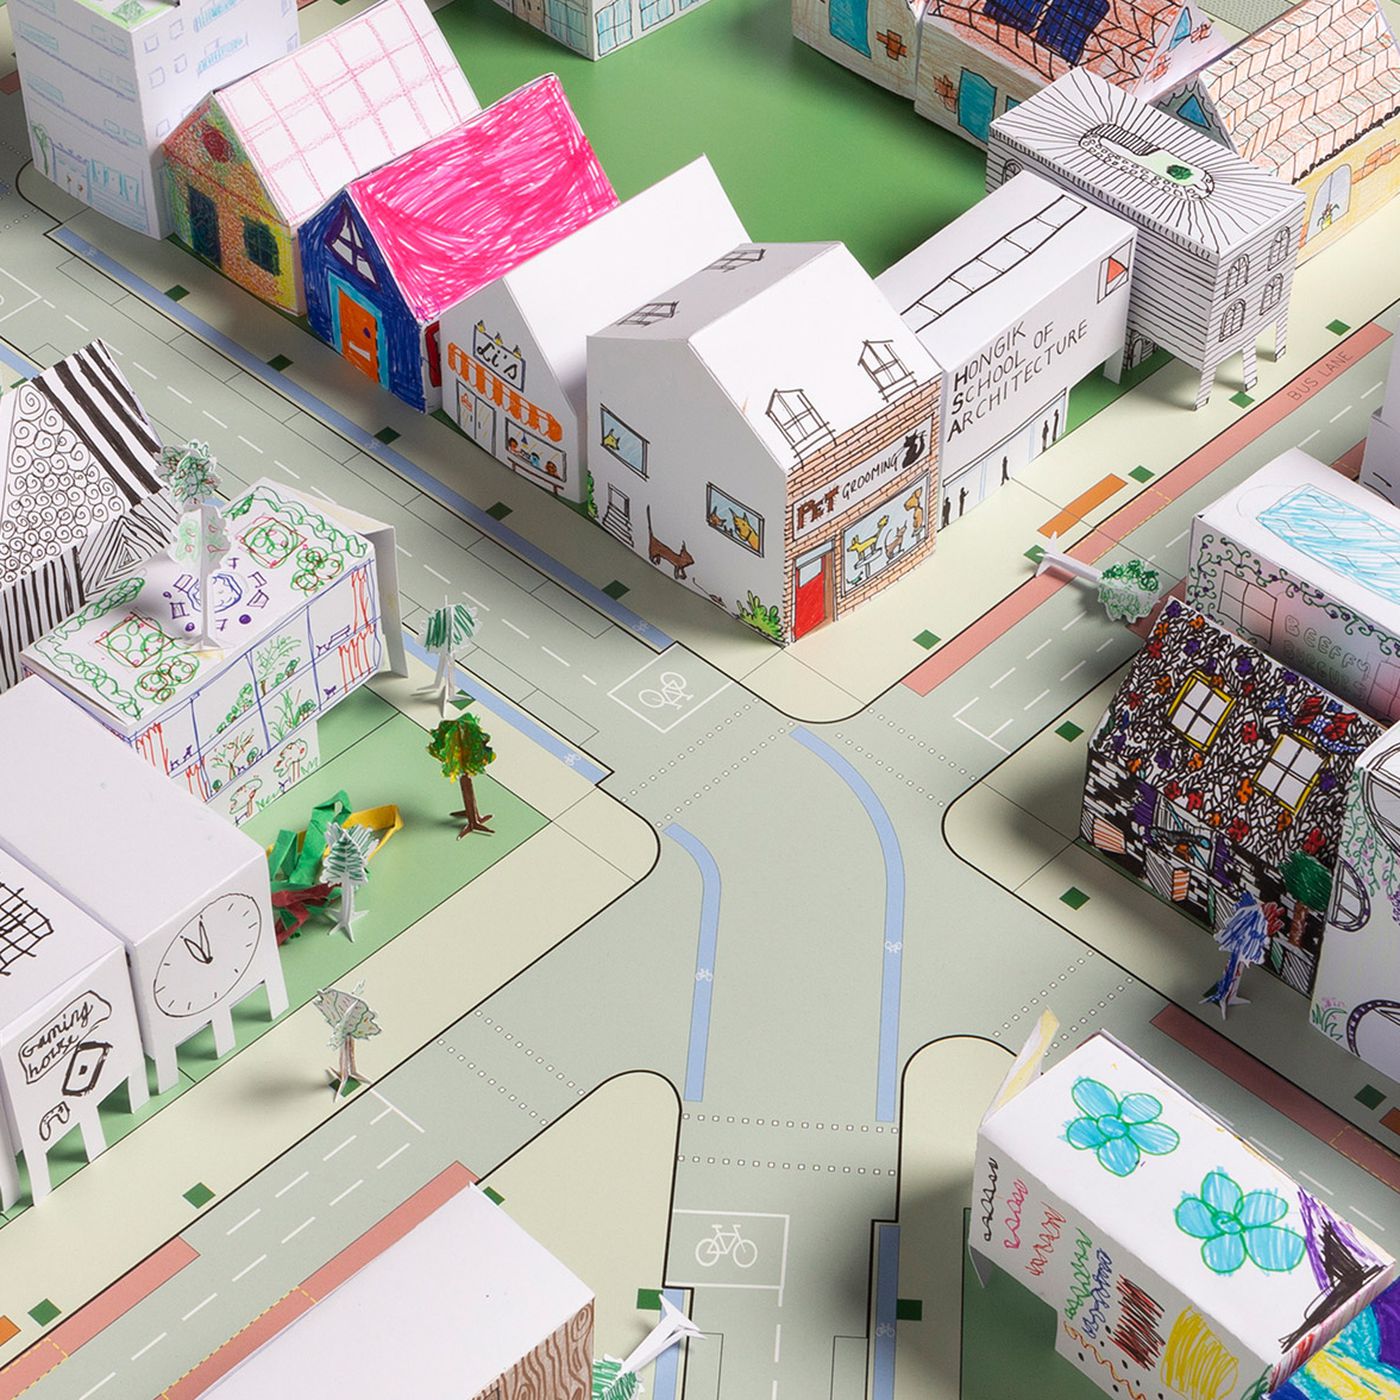 Free Downloadable Activities Let Kids Explore Architecture And